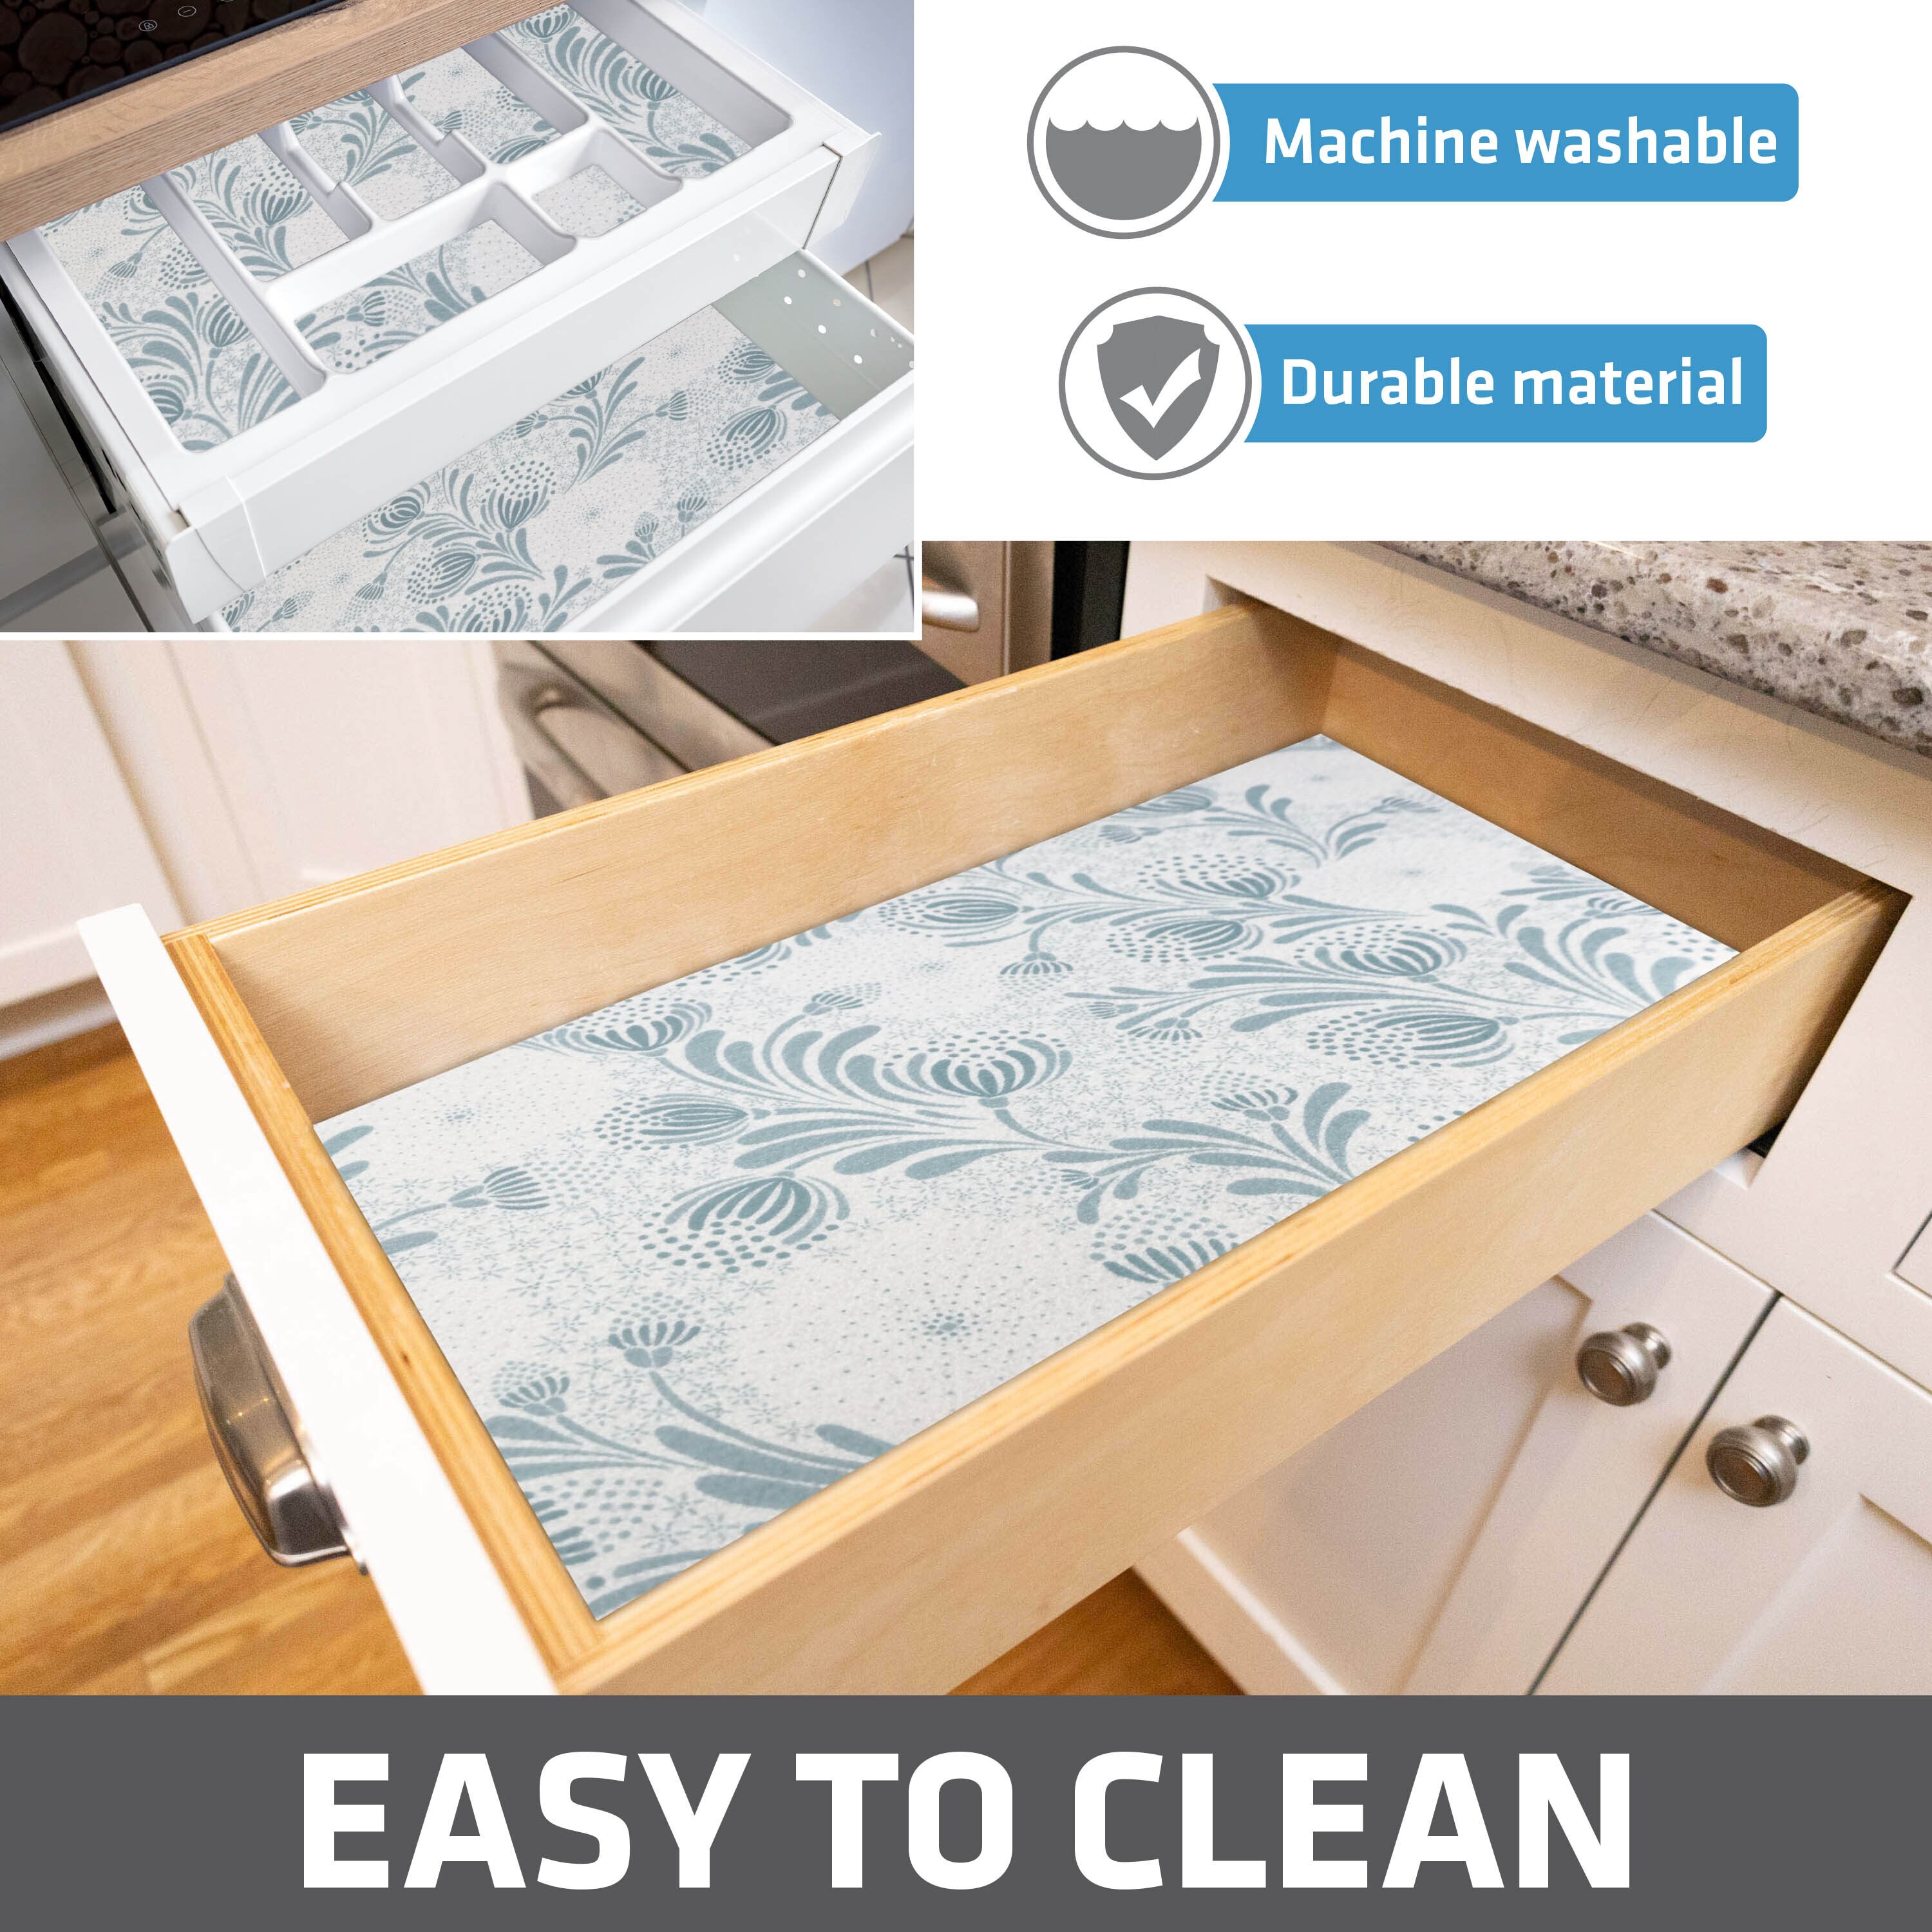 Drymate Luxury Fabric Shelf Liners, Cushioned Material - Absorbent,  Waterproof, Machine Washable & Reviews